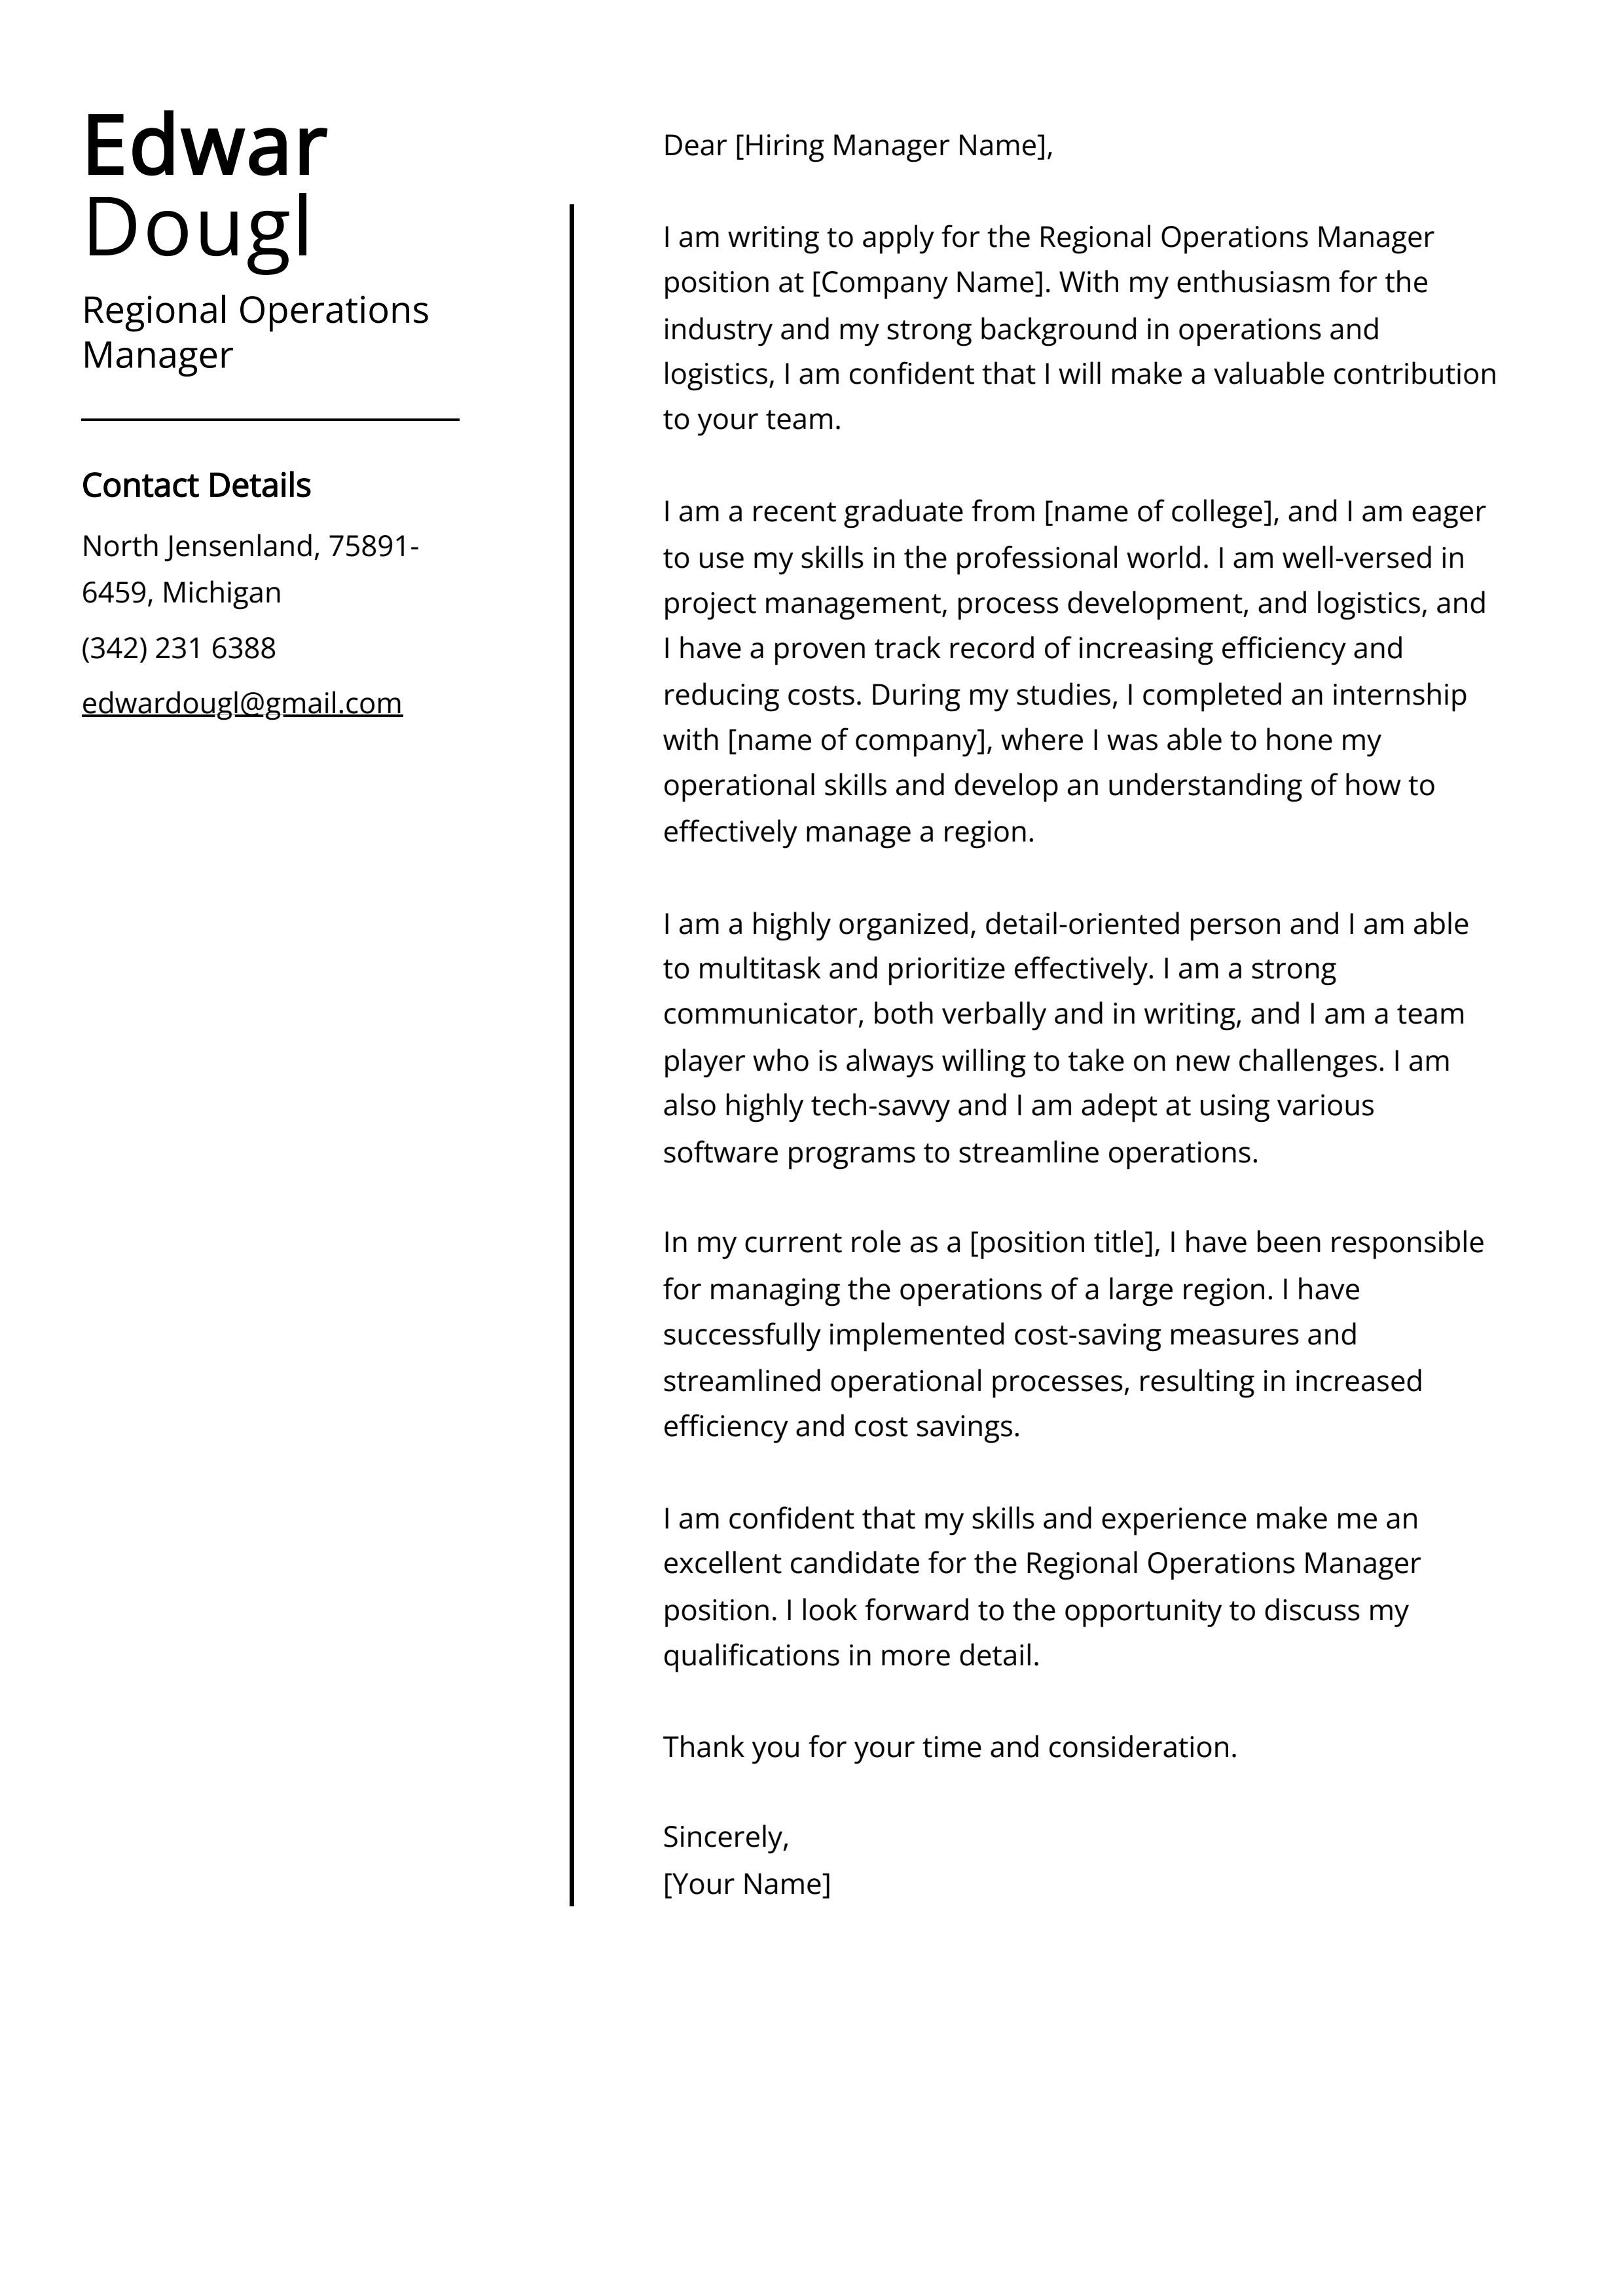 Regional Operations Manager Cover Letter Example